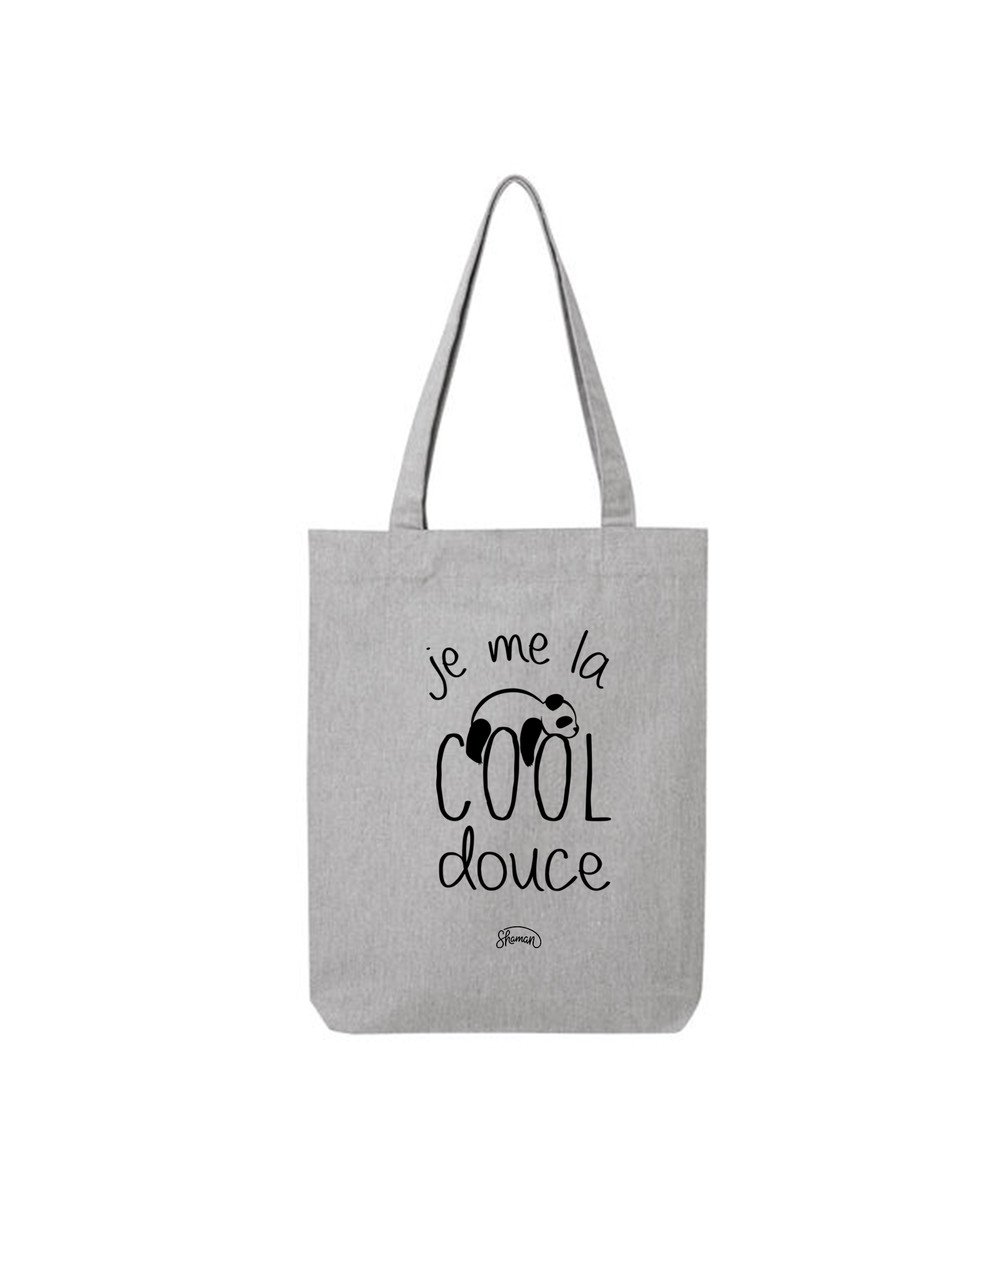 Tote Bag "Cool douce"